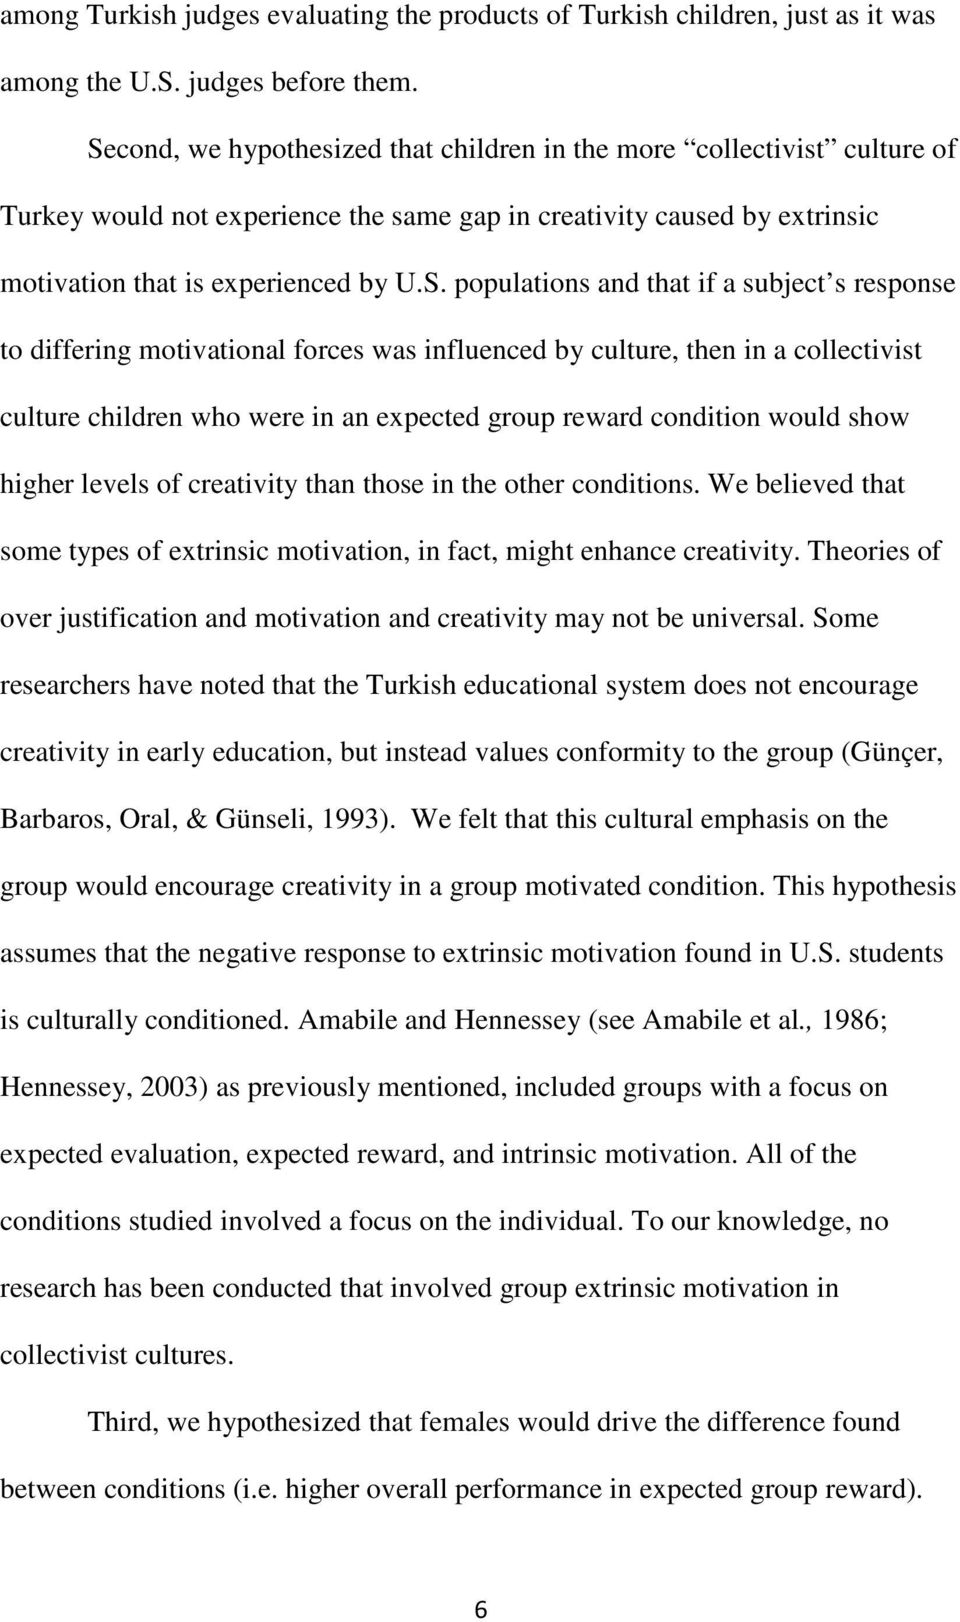 and that if a subject s response to differing motivational forces was influenced by culture, then in a collectivist culture children who were in an expected group reward condition would show higher